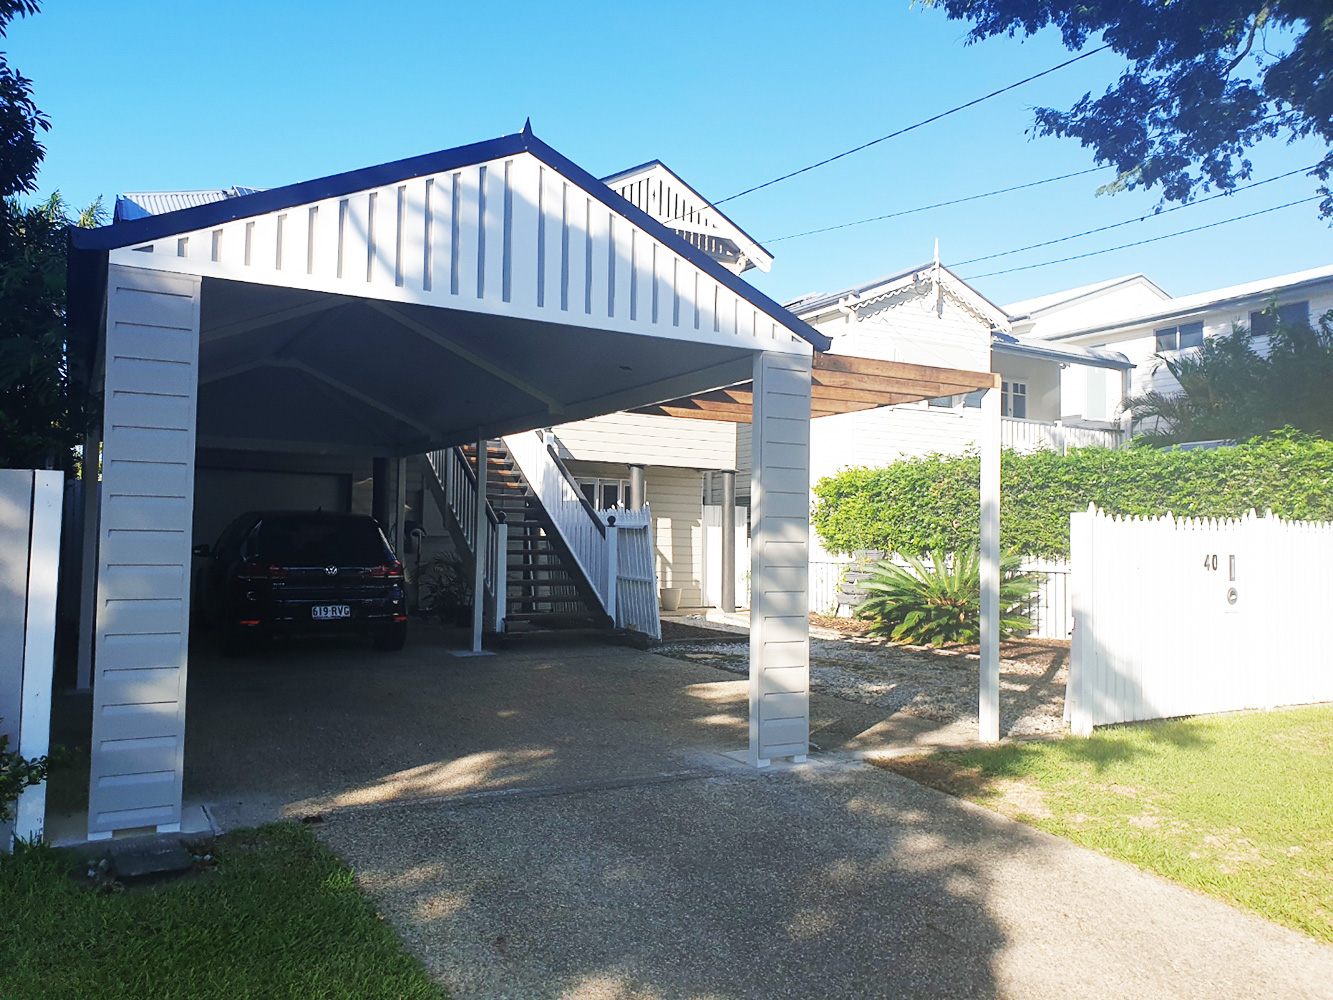 Gable carport with fully welded and Dulux powder coated. All-Gal trusses and beams. Weather board cladding and a fibre cement sheet with decorative cover strips to create an appealing facade. This structure is complete with a hardwood planter trellis.